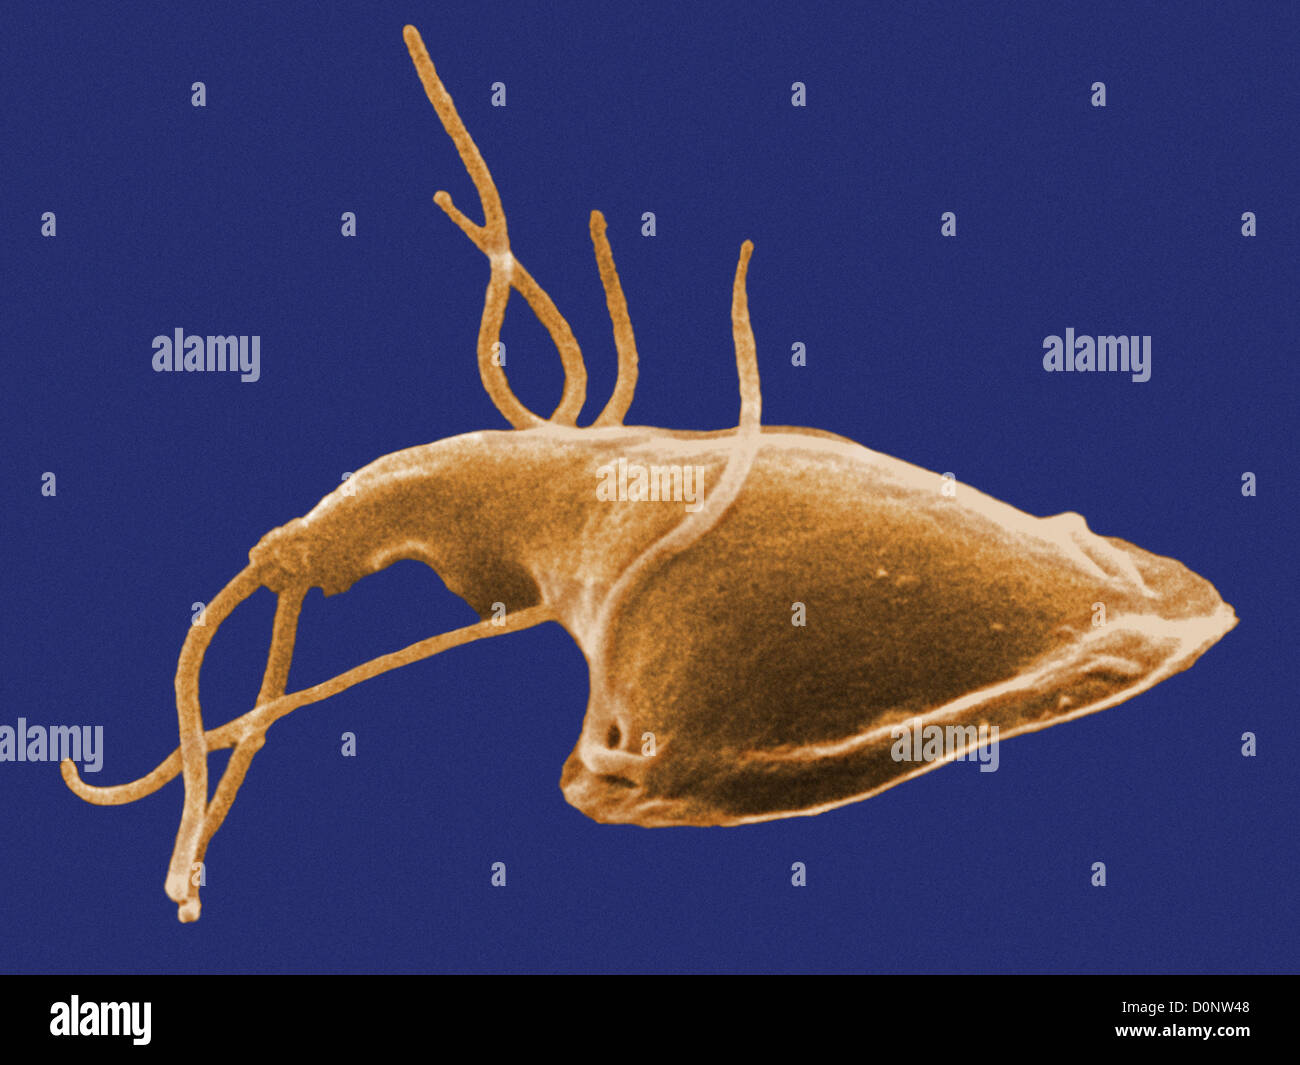 This digitally-colorized scanning electron micrograph (SEM) depicted dorsal (upper) surface Giardia protozoan that had been Stock Photo